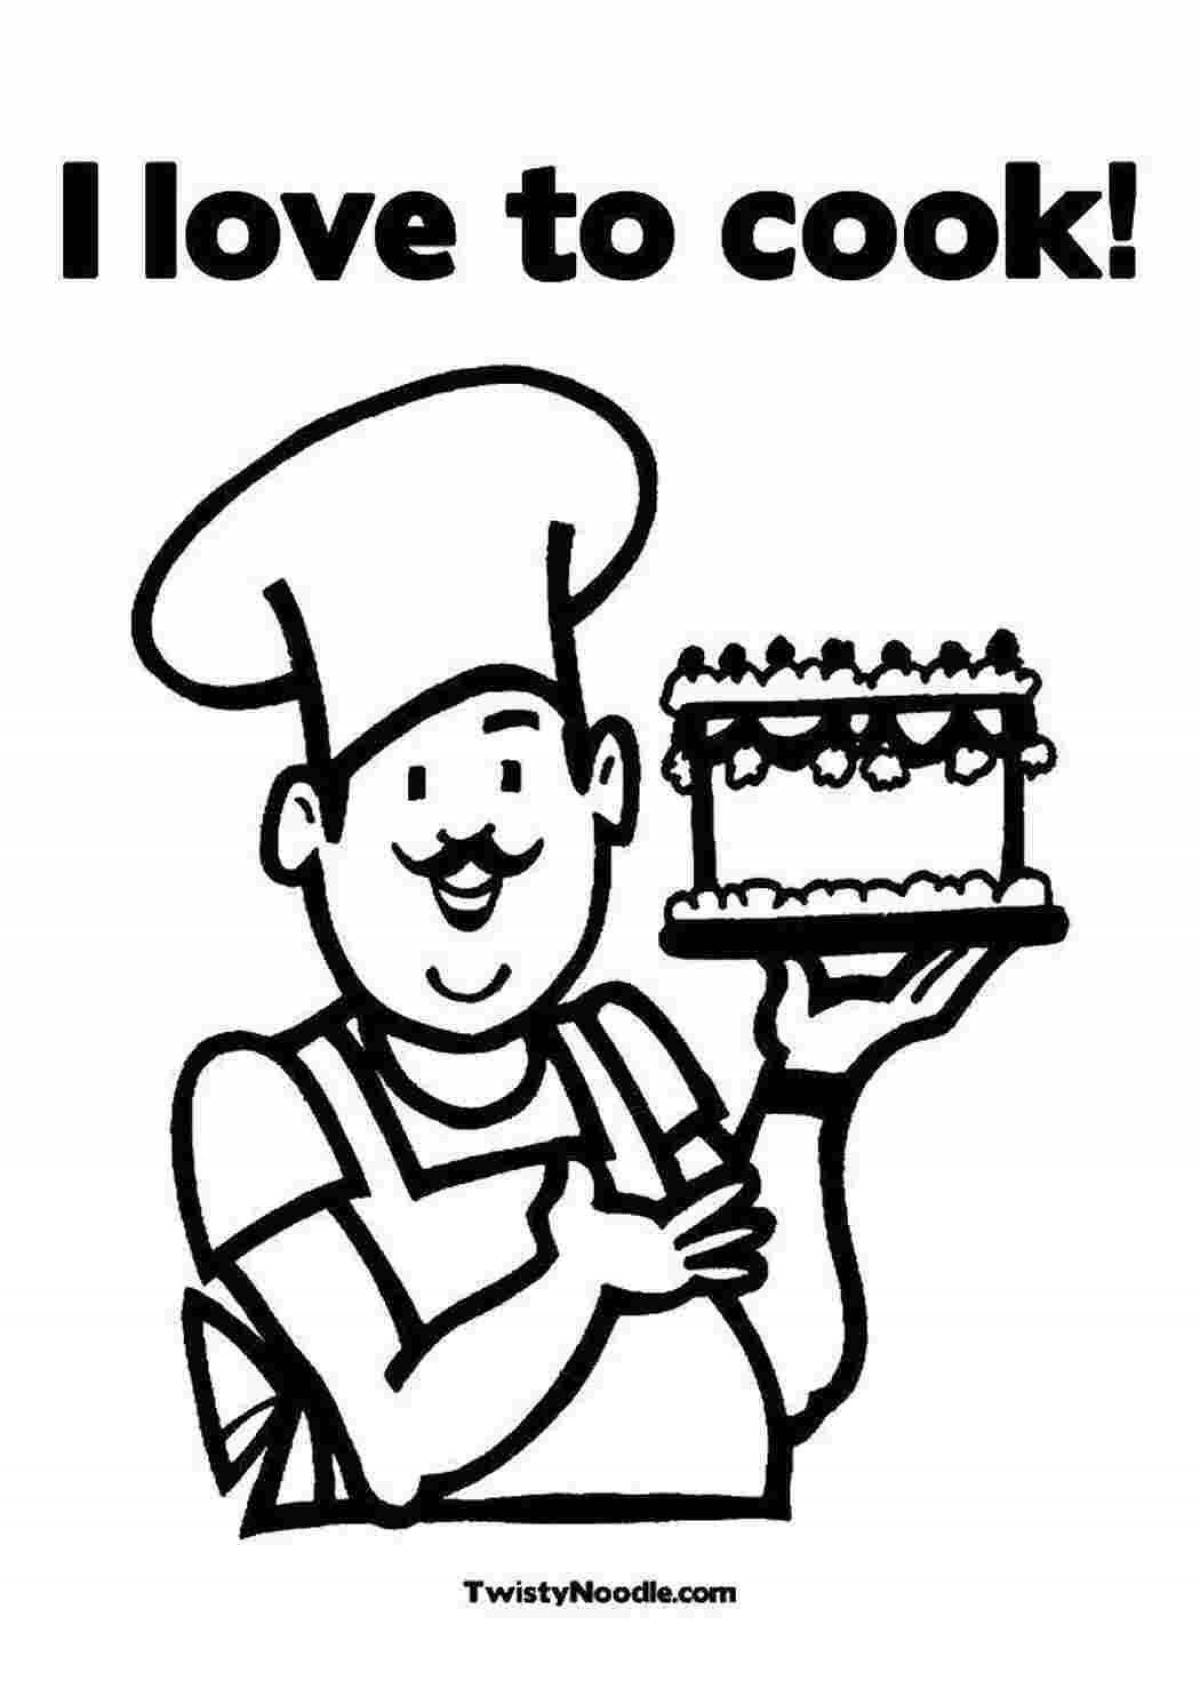 Pastry Chef color playful coloring page